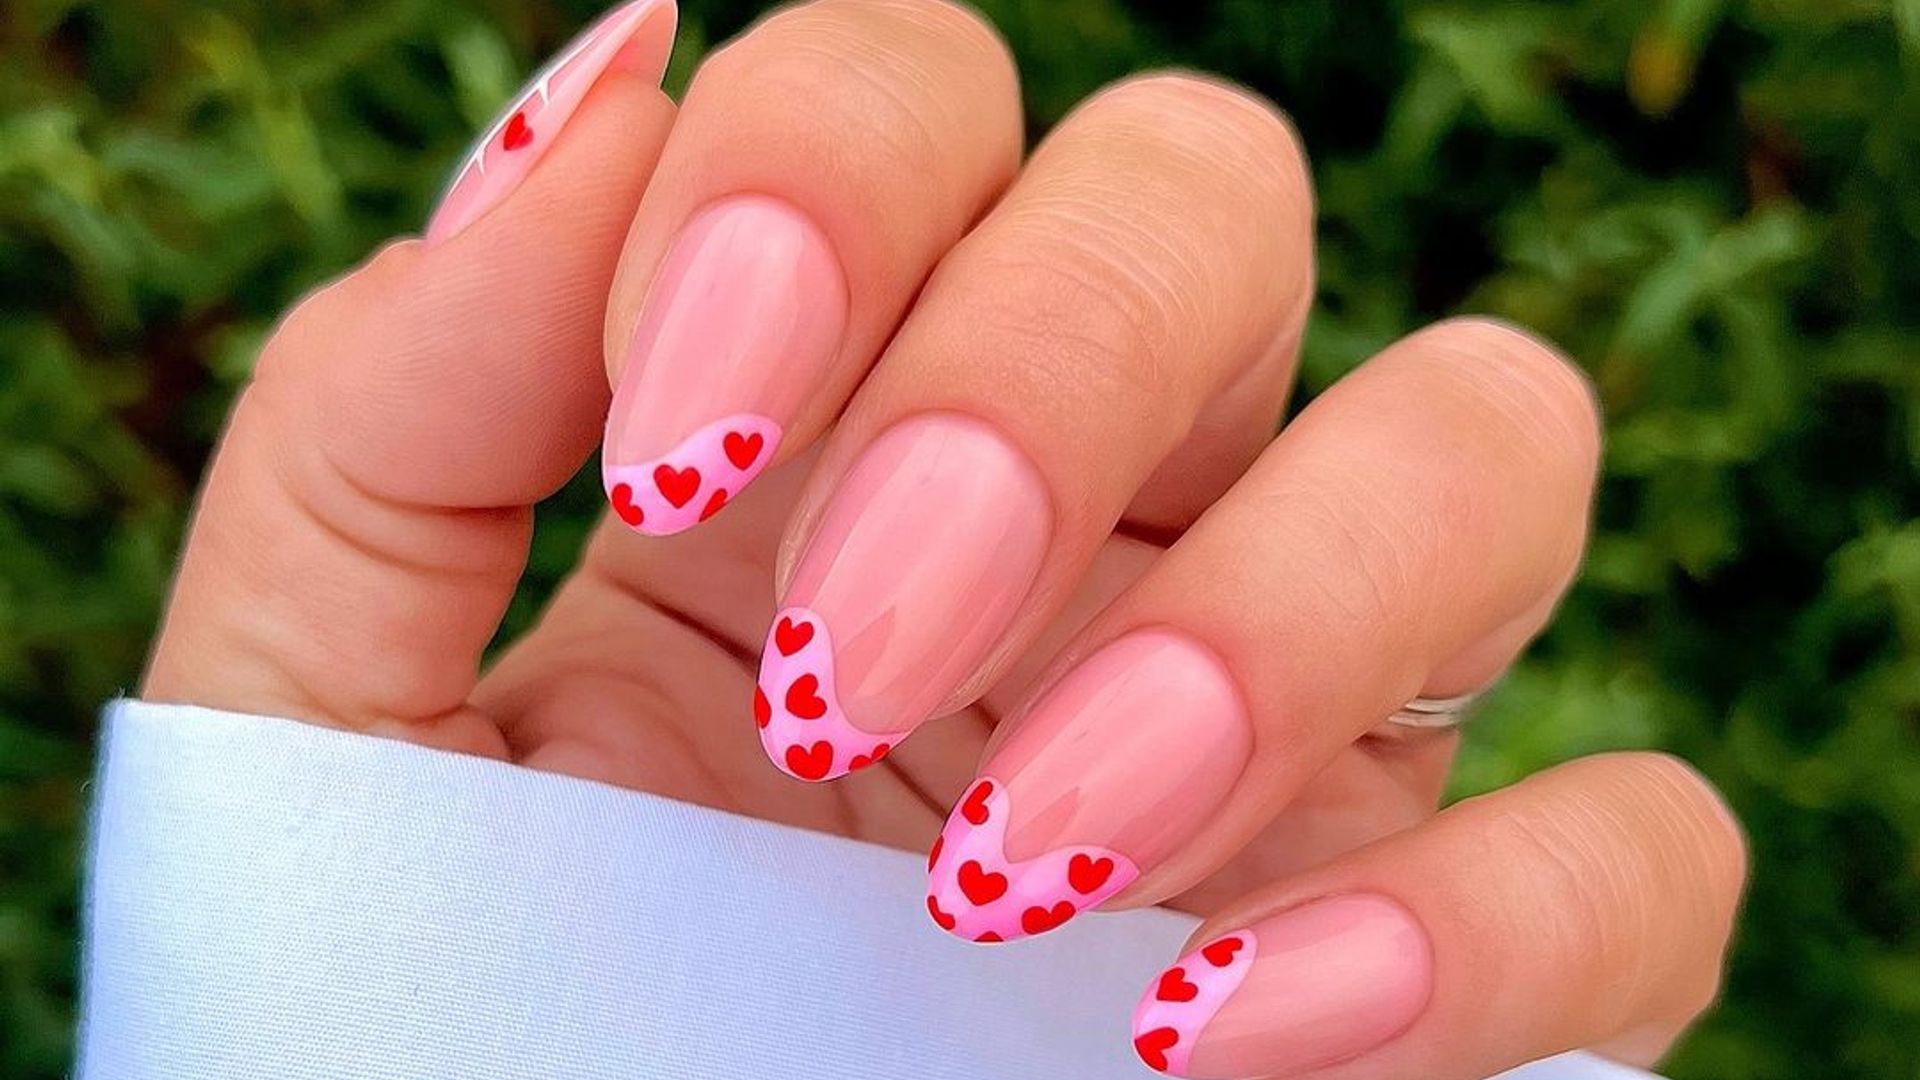 35 Cute Valentine's Day Nails You'll Want To Wear : Shades of Pink  Valentine Nails | Nail art, Stylish nails, Gel nails